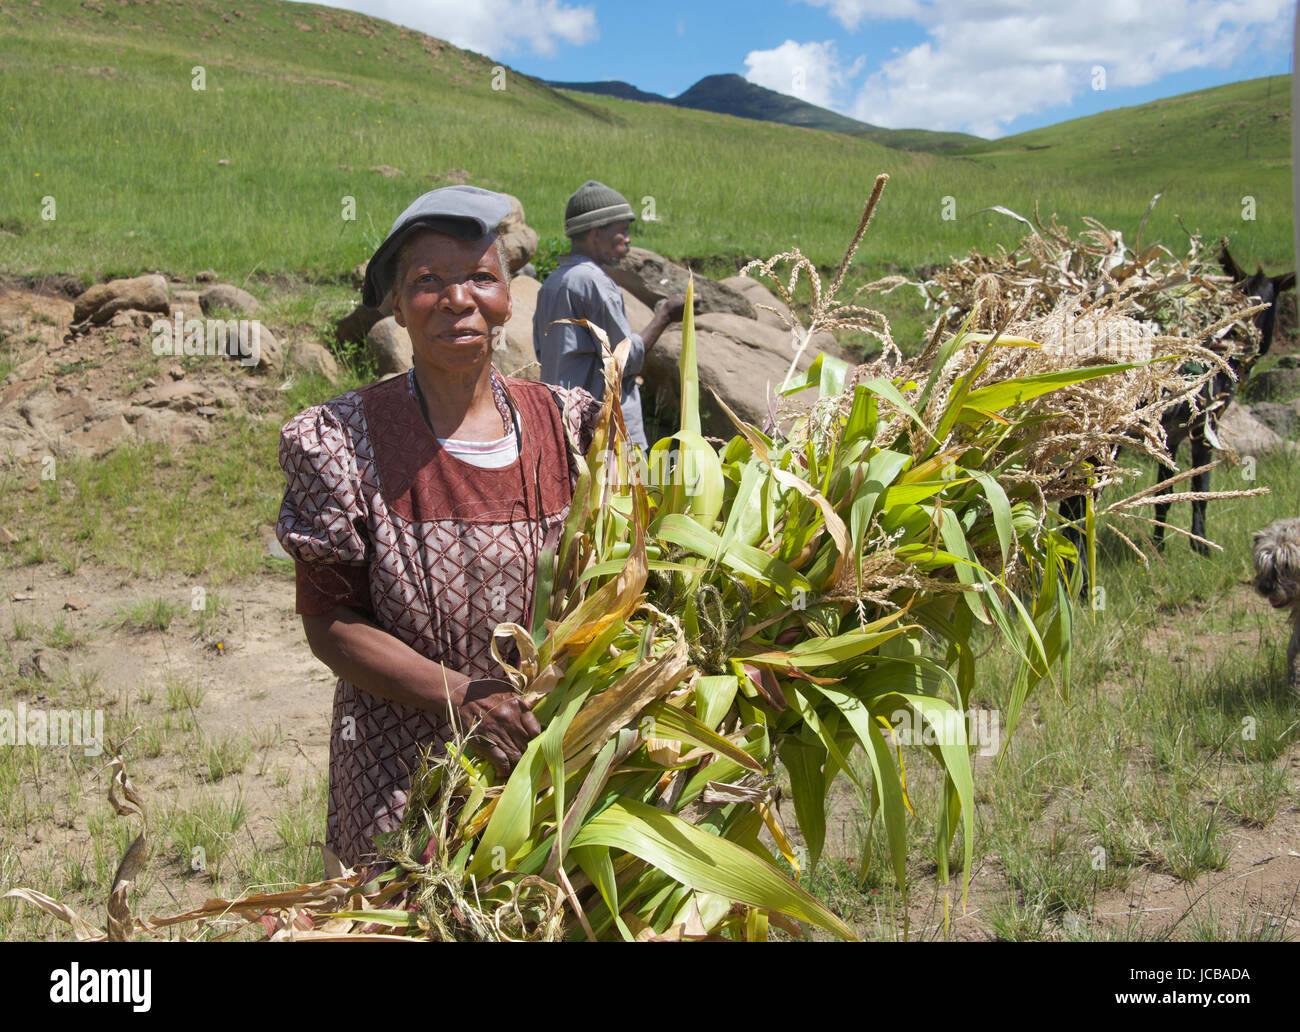 Woman and man with bundles of crops loading donkey Semonkong Southern Highlands Lesotho Southern Africa Stock Photo